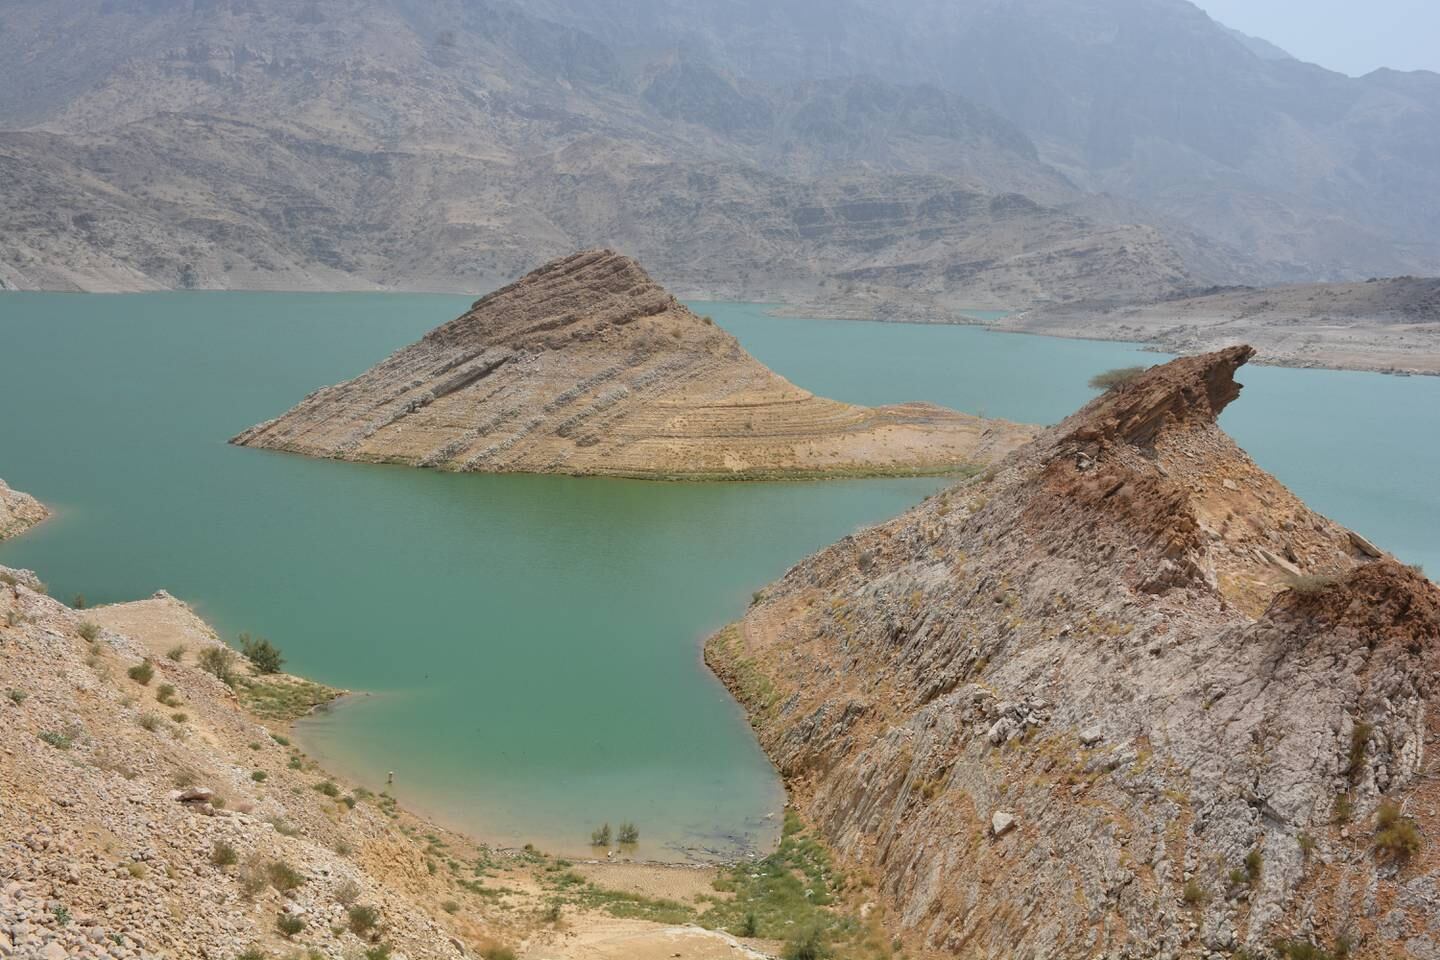 Wadi Dayqah in Quriyat, a town 120km west of Muscat in Oman, has had the world's highest daily low temperature. Photo: Saleh Al-Shaibany